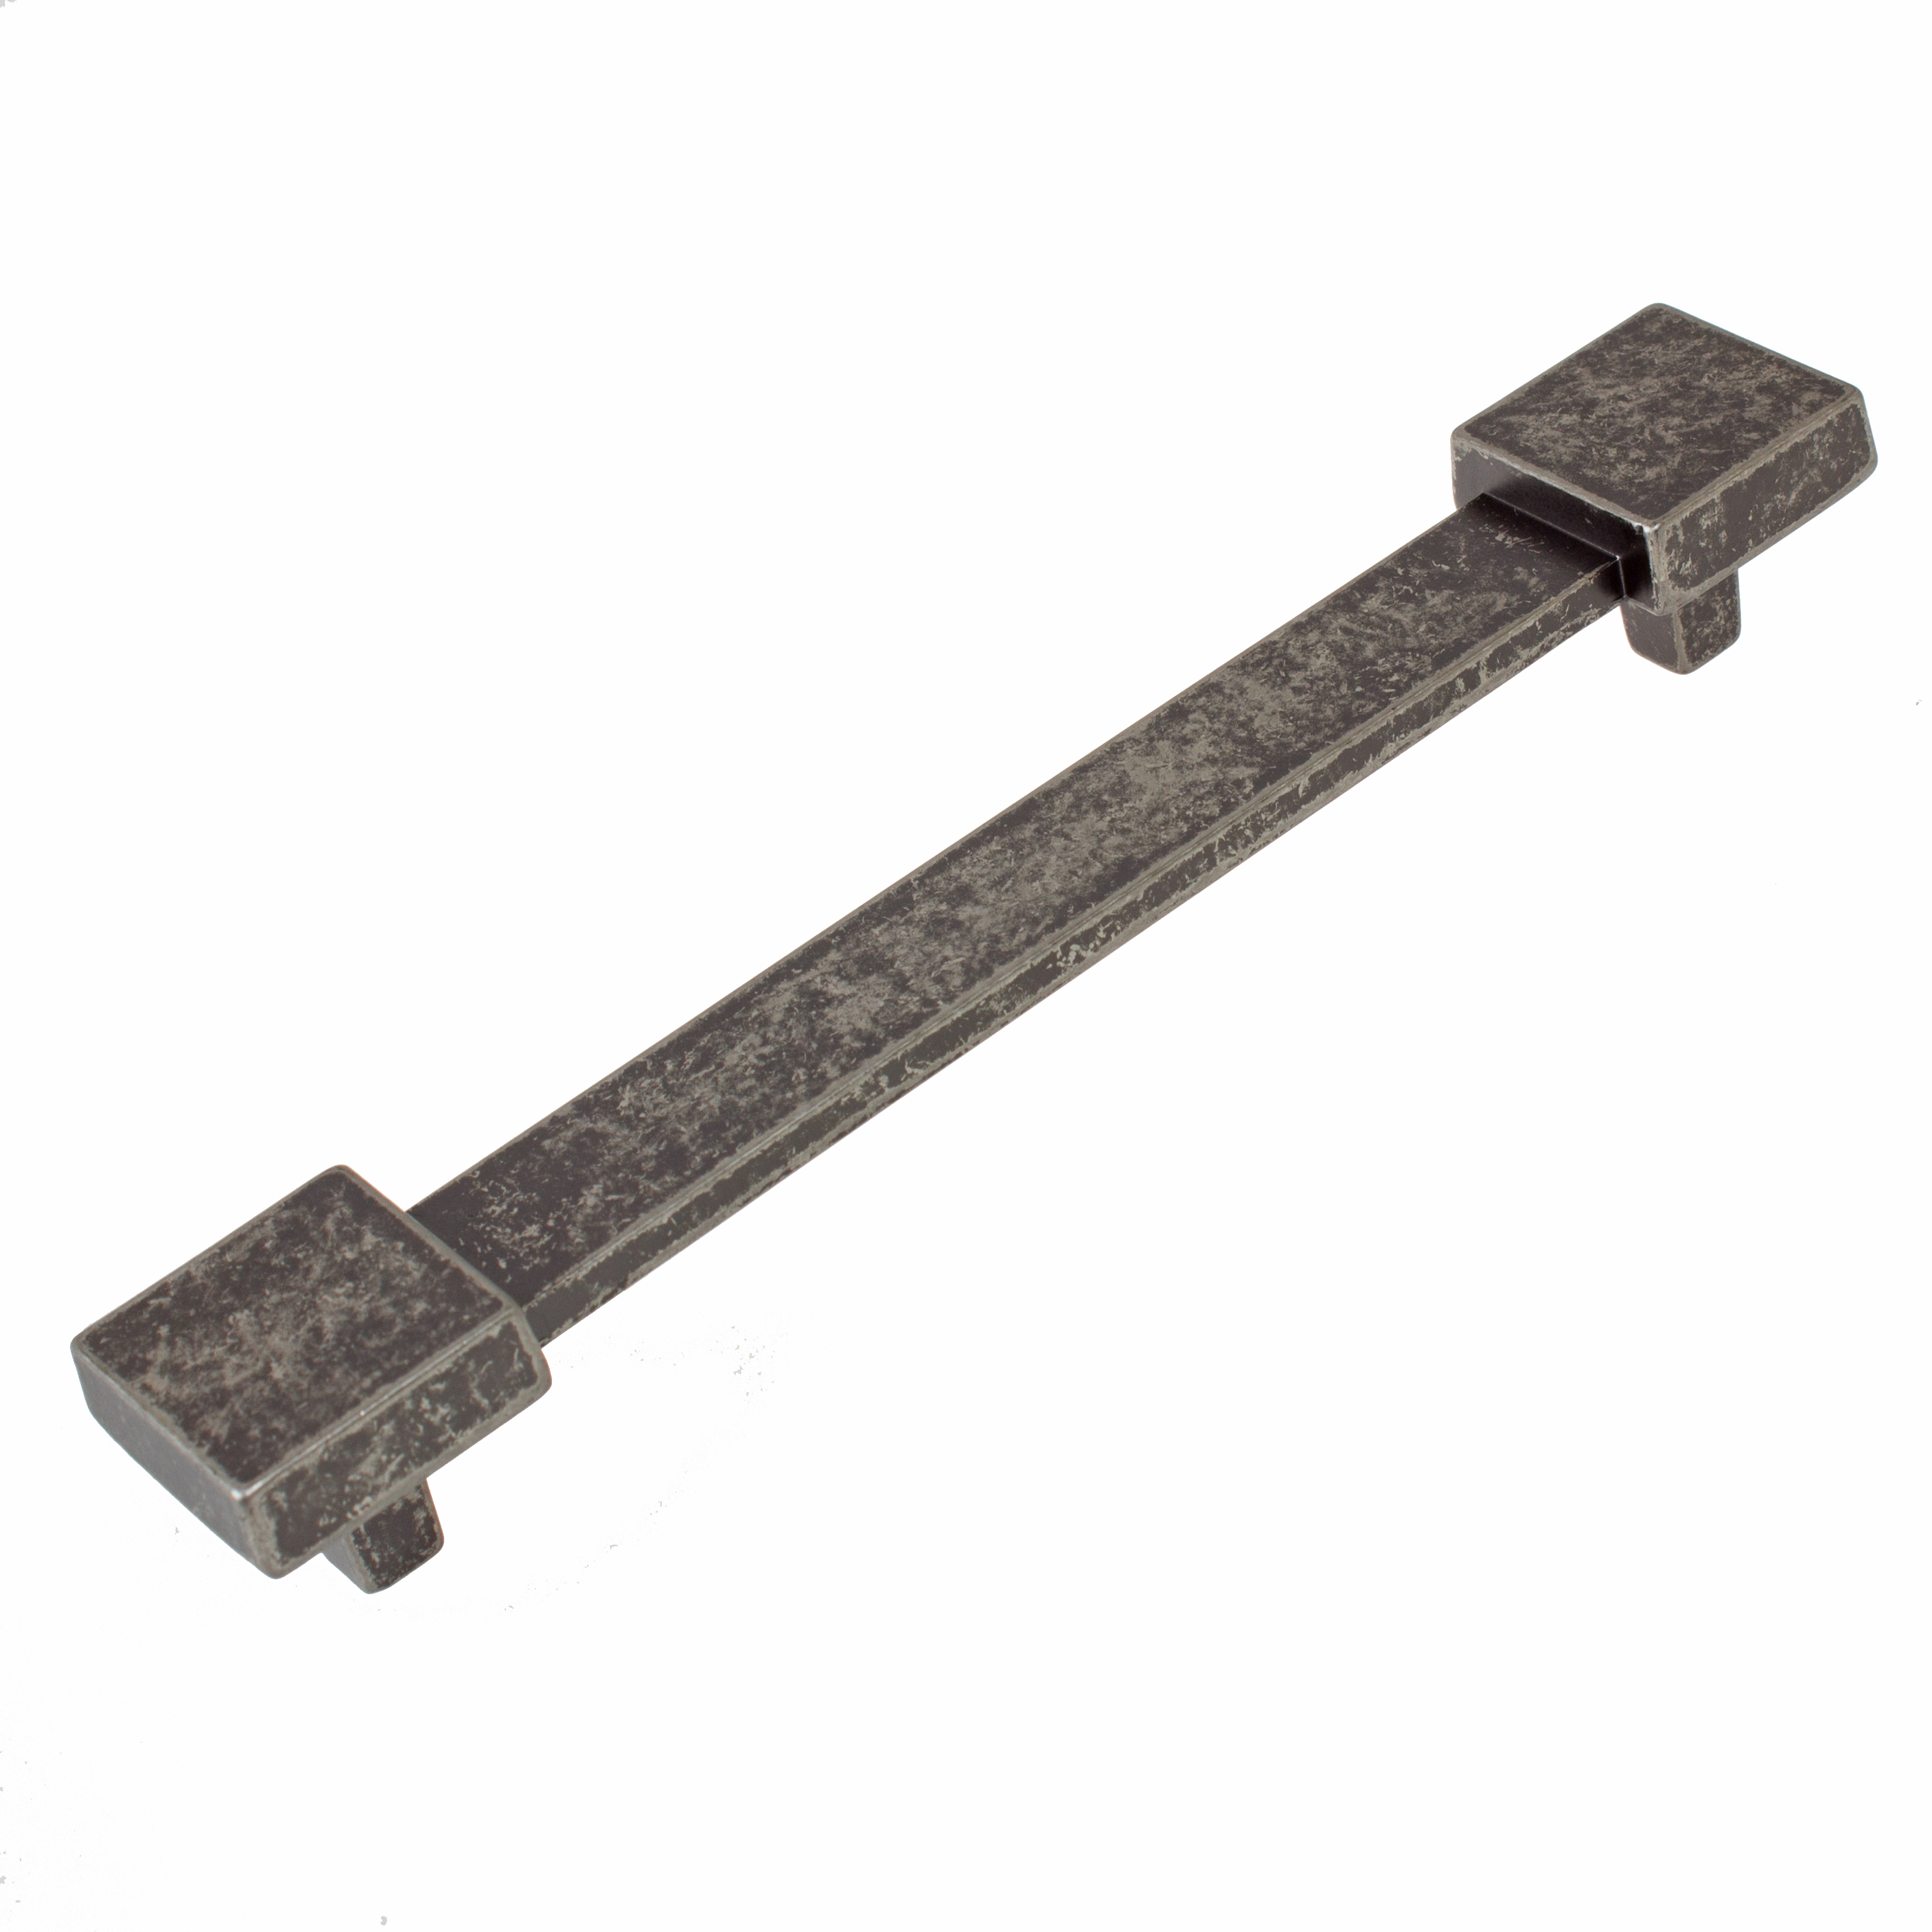 GlideRite 5 Inch Center Square Edge Pull Cabinet Hardware Handles, Weathered Nickel, Pack of 25 - image 1 of 5